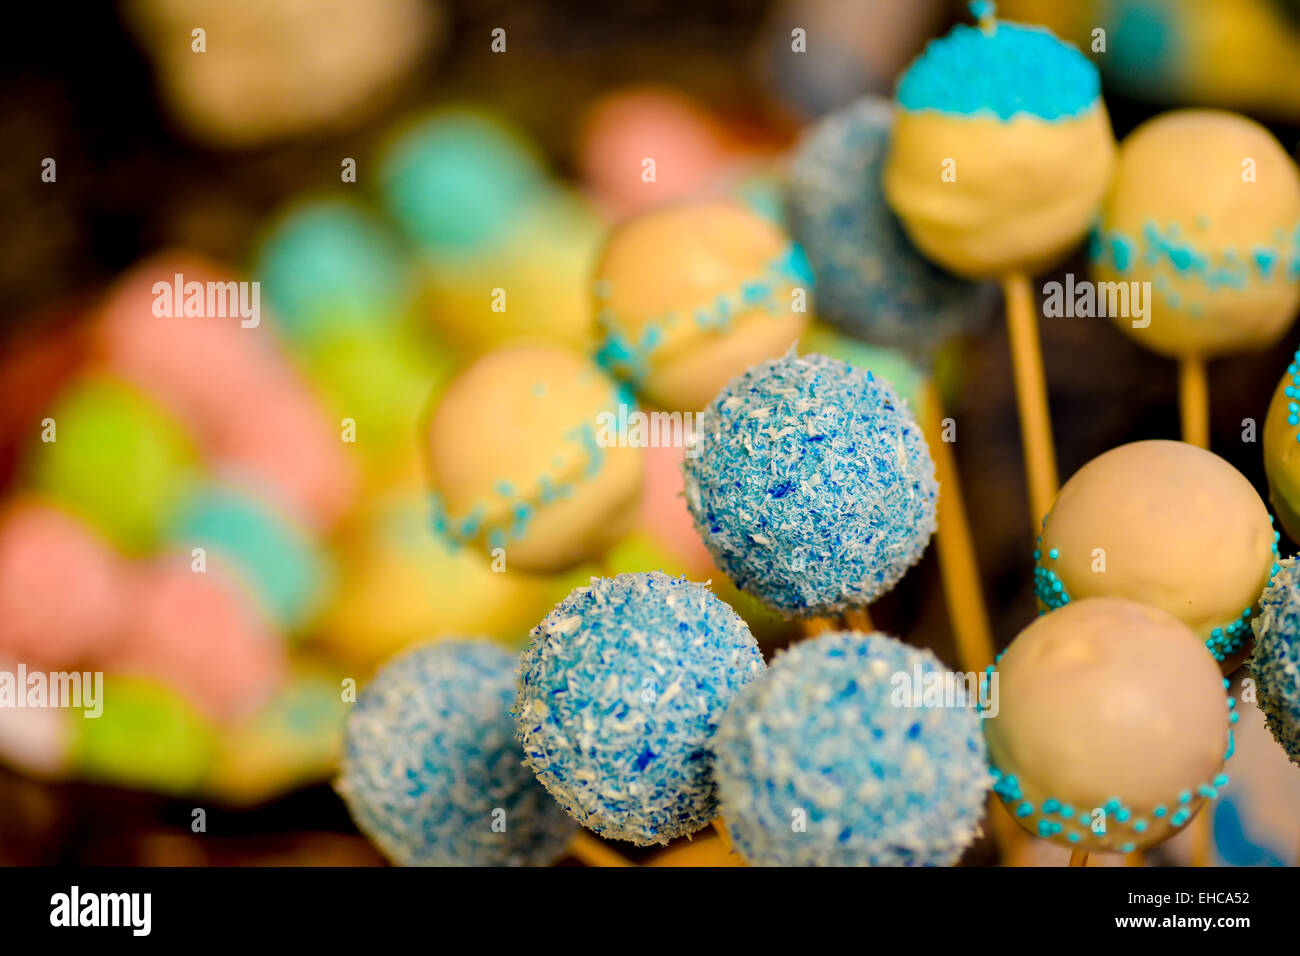 Many candies arranged in a glass bowl at a party Stock Photo